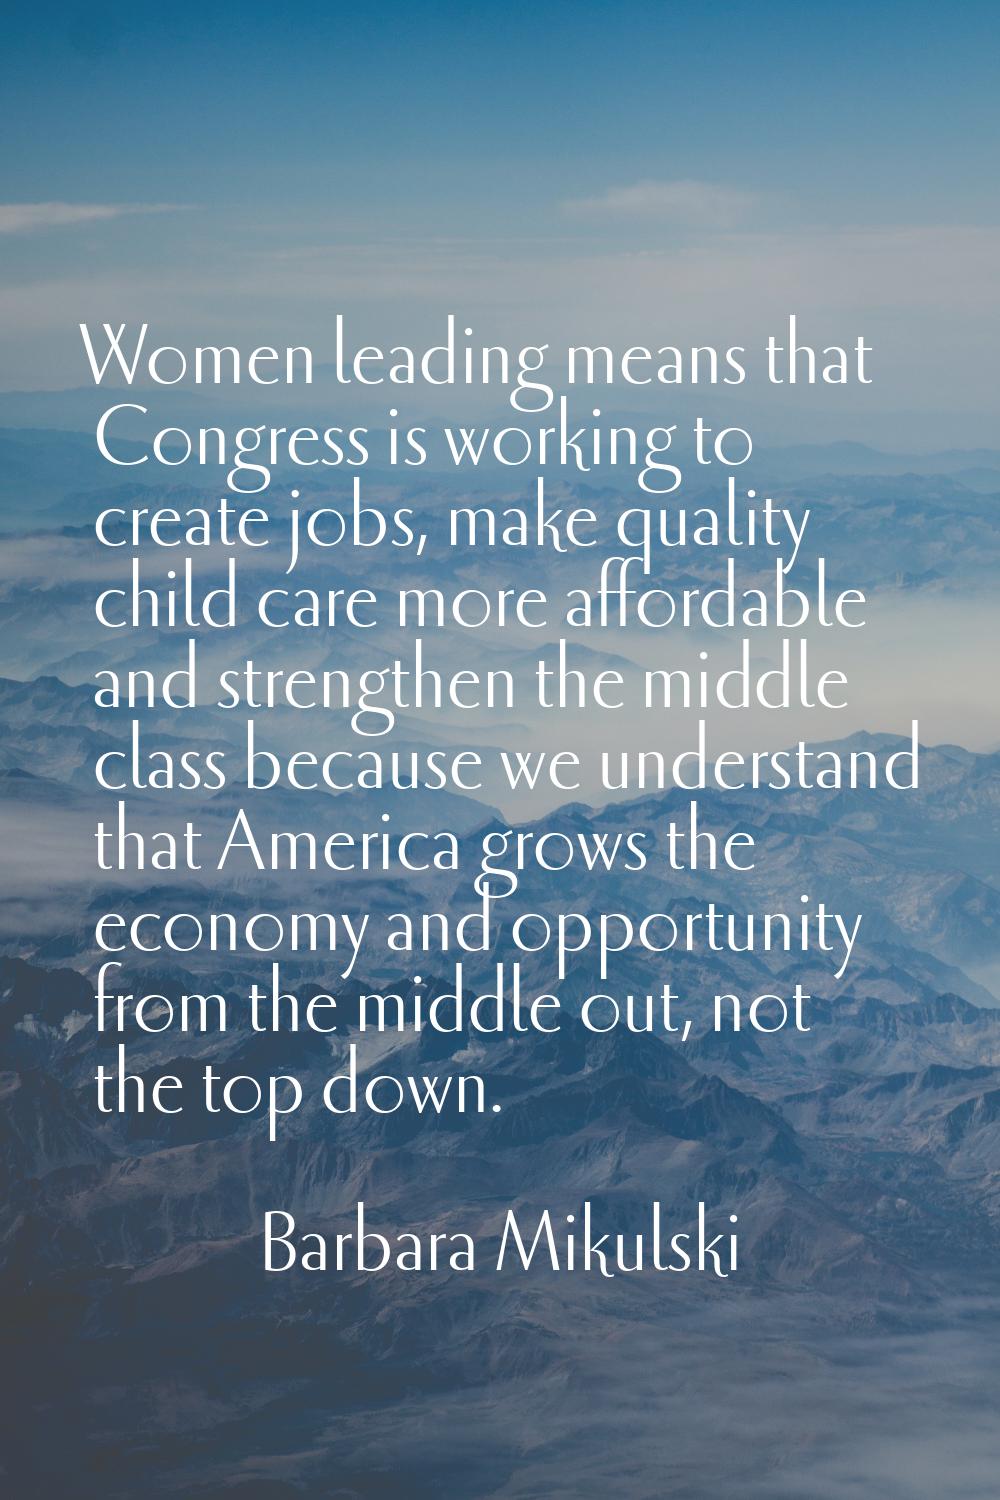 Women leading means that Congress is working to create jobs, make quality child care more affordabl